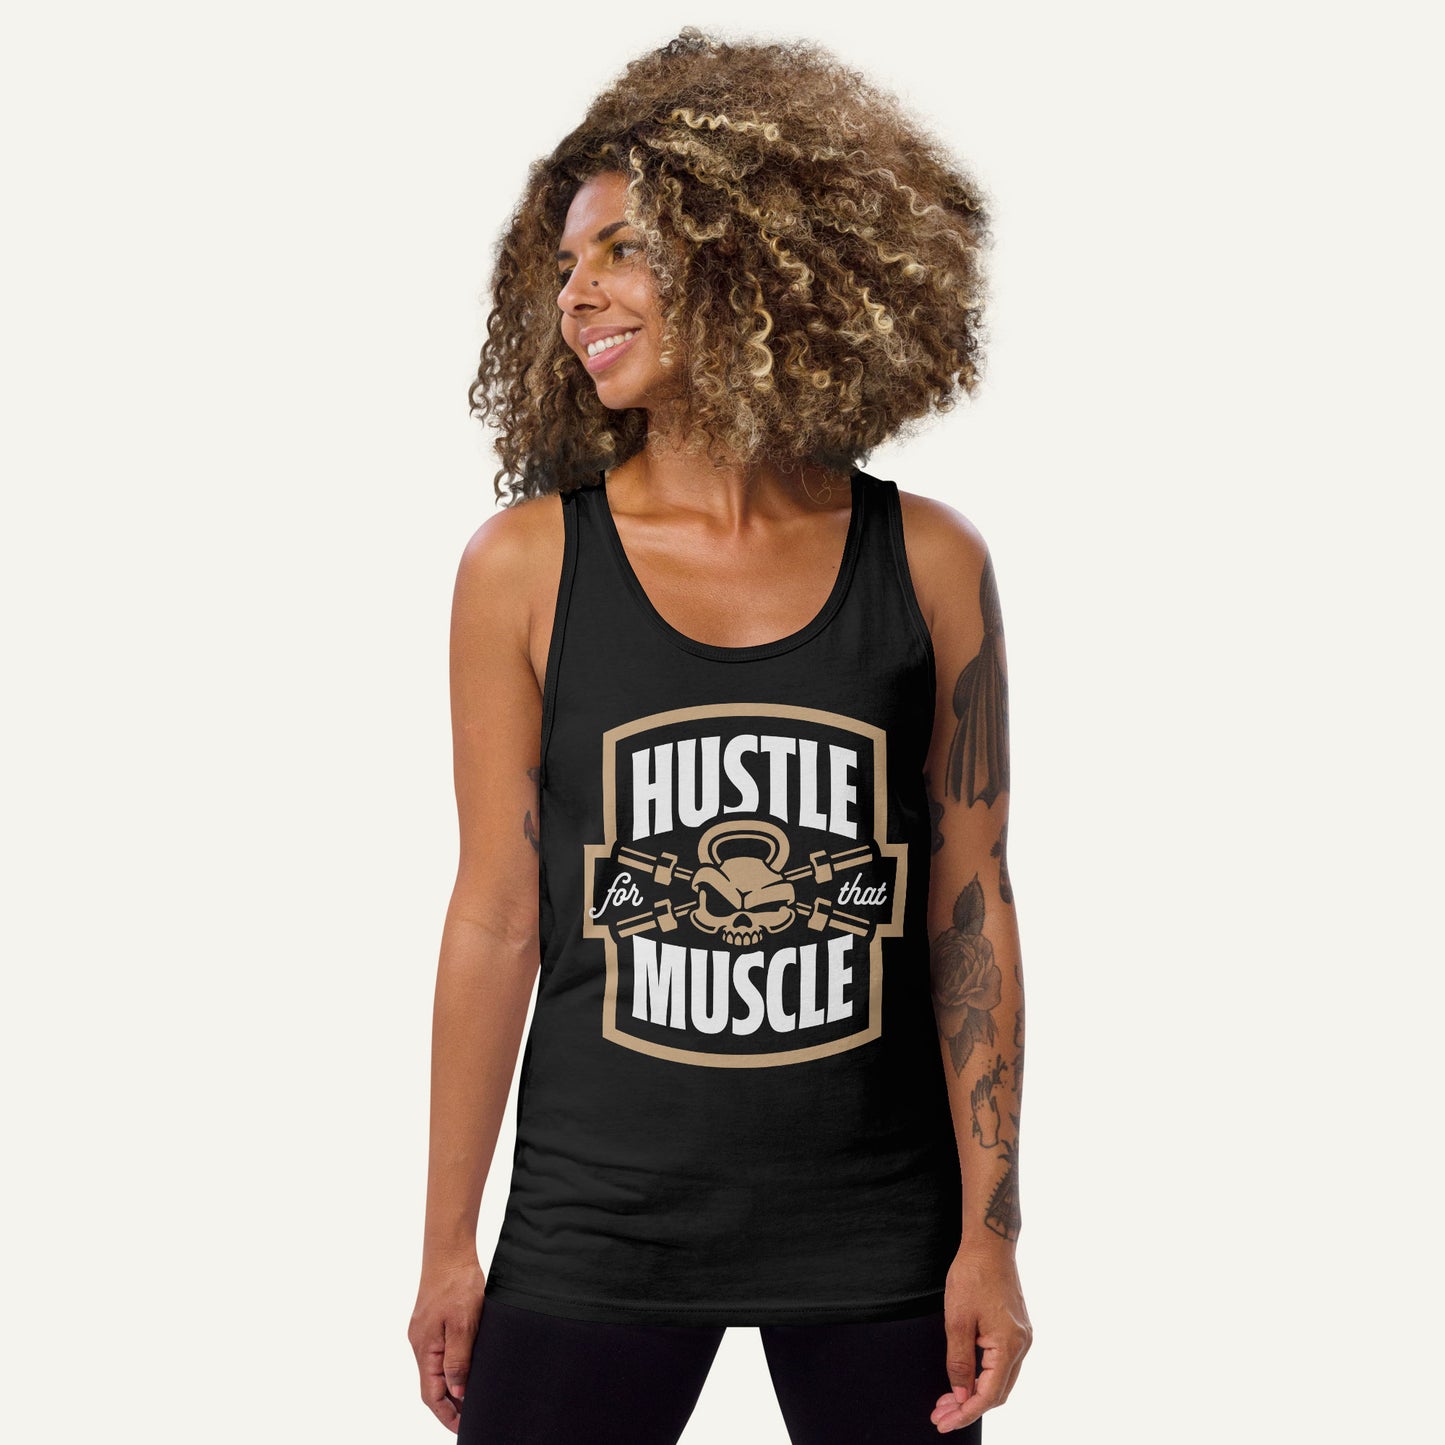 Hustle For That Muscle Men’s Tank Top